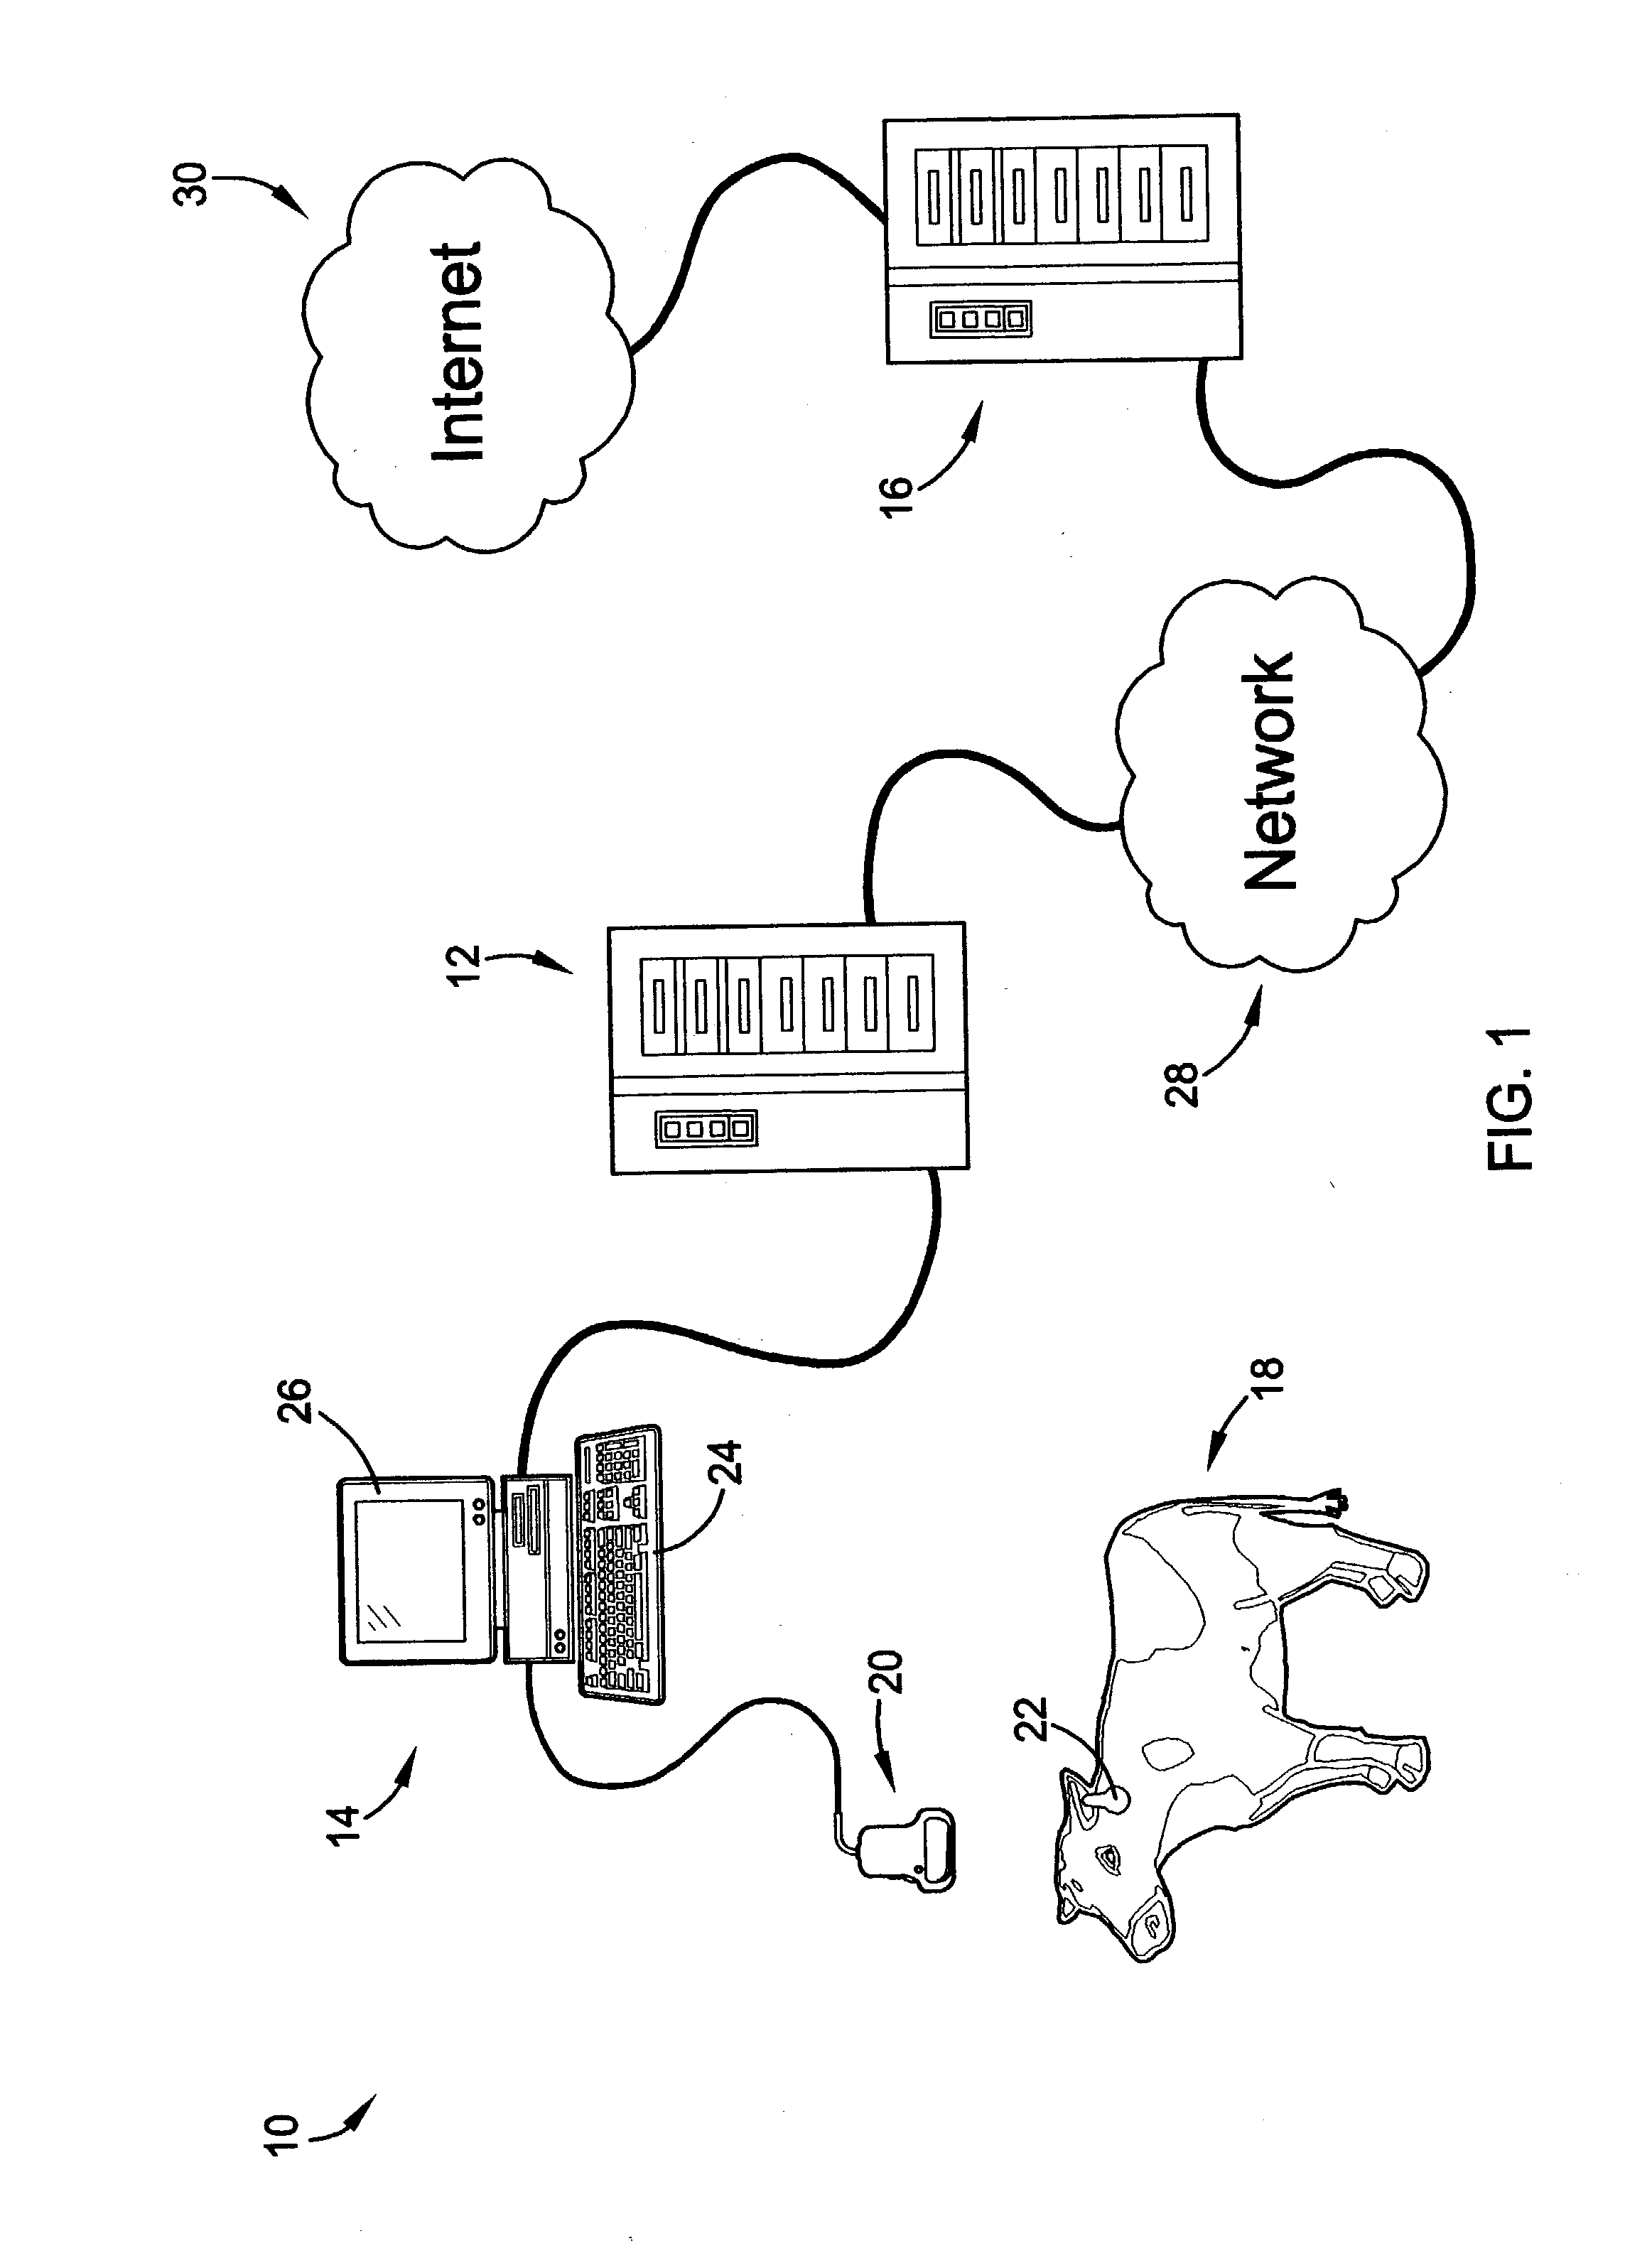 Information system and method for gathering information relating to livestock